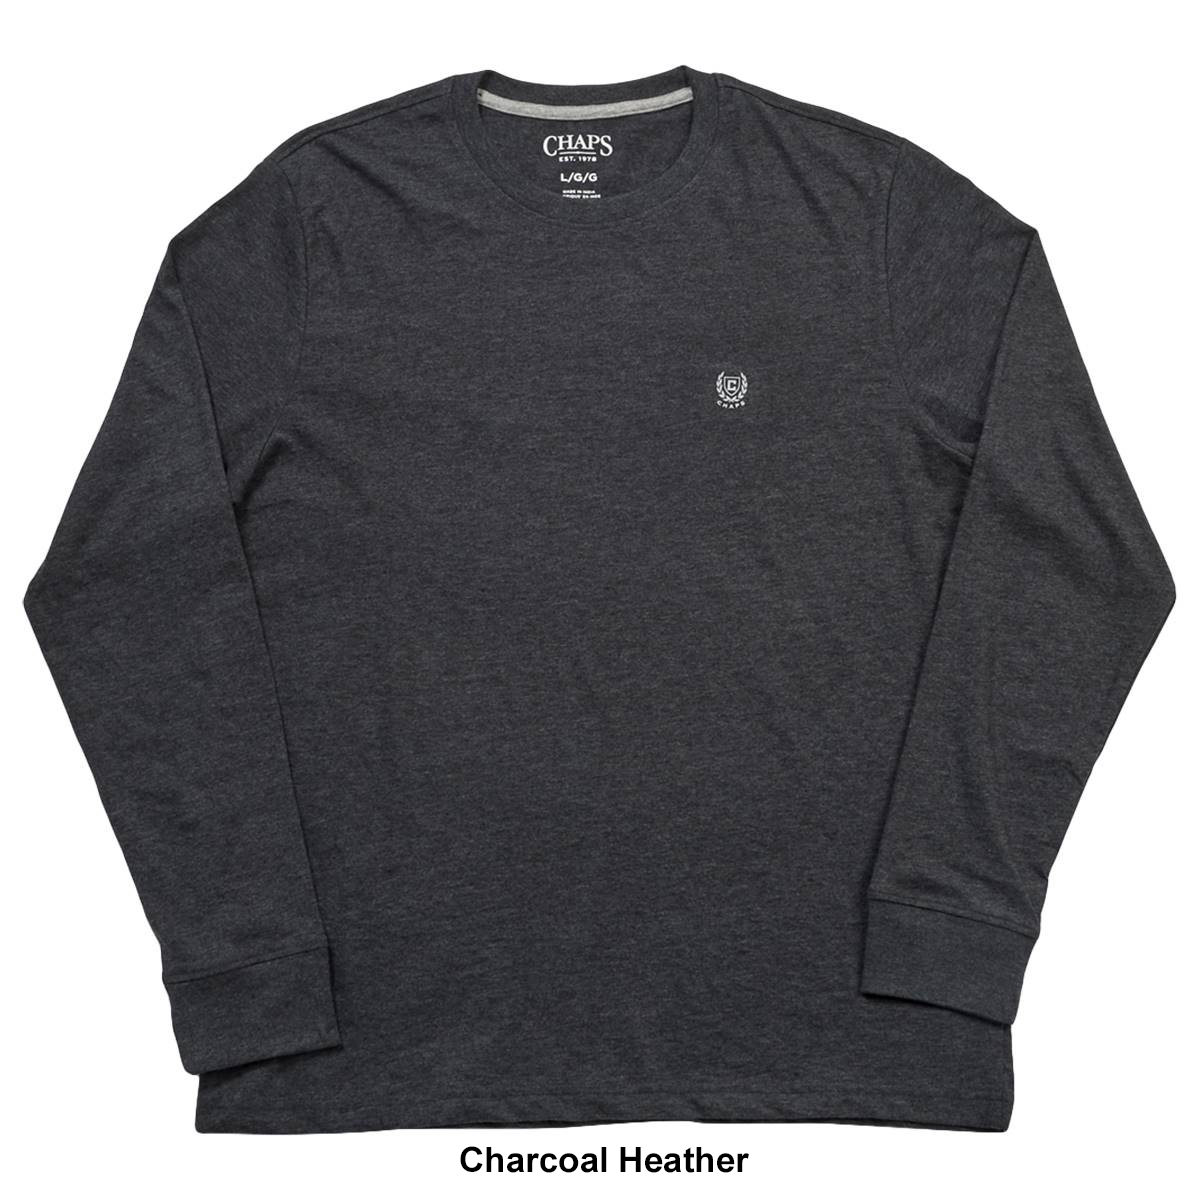 Mens Chaps Long Sleeve Solid Jersey Crew Tee